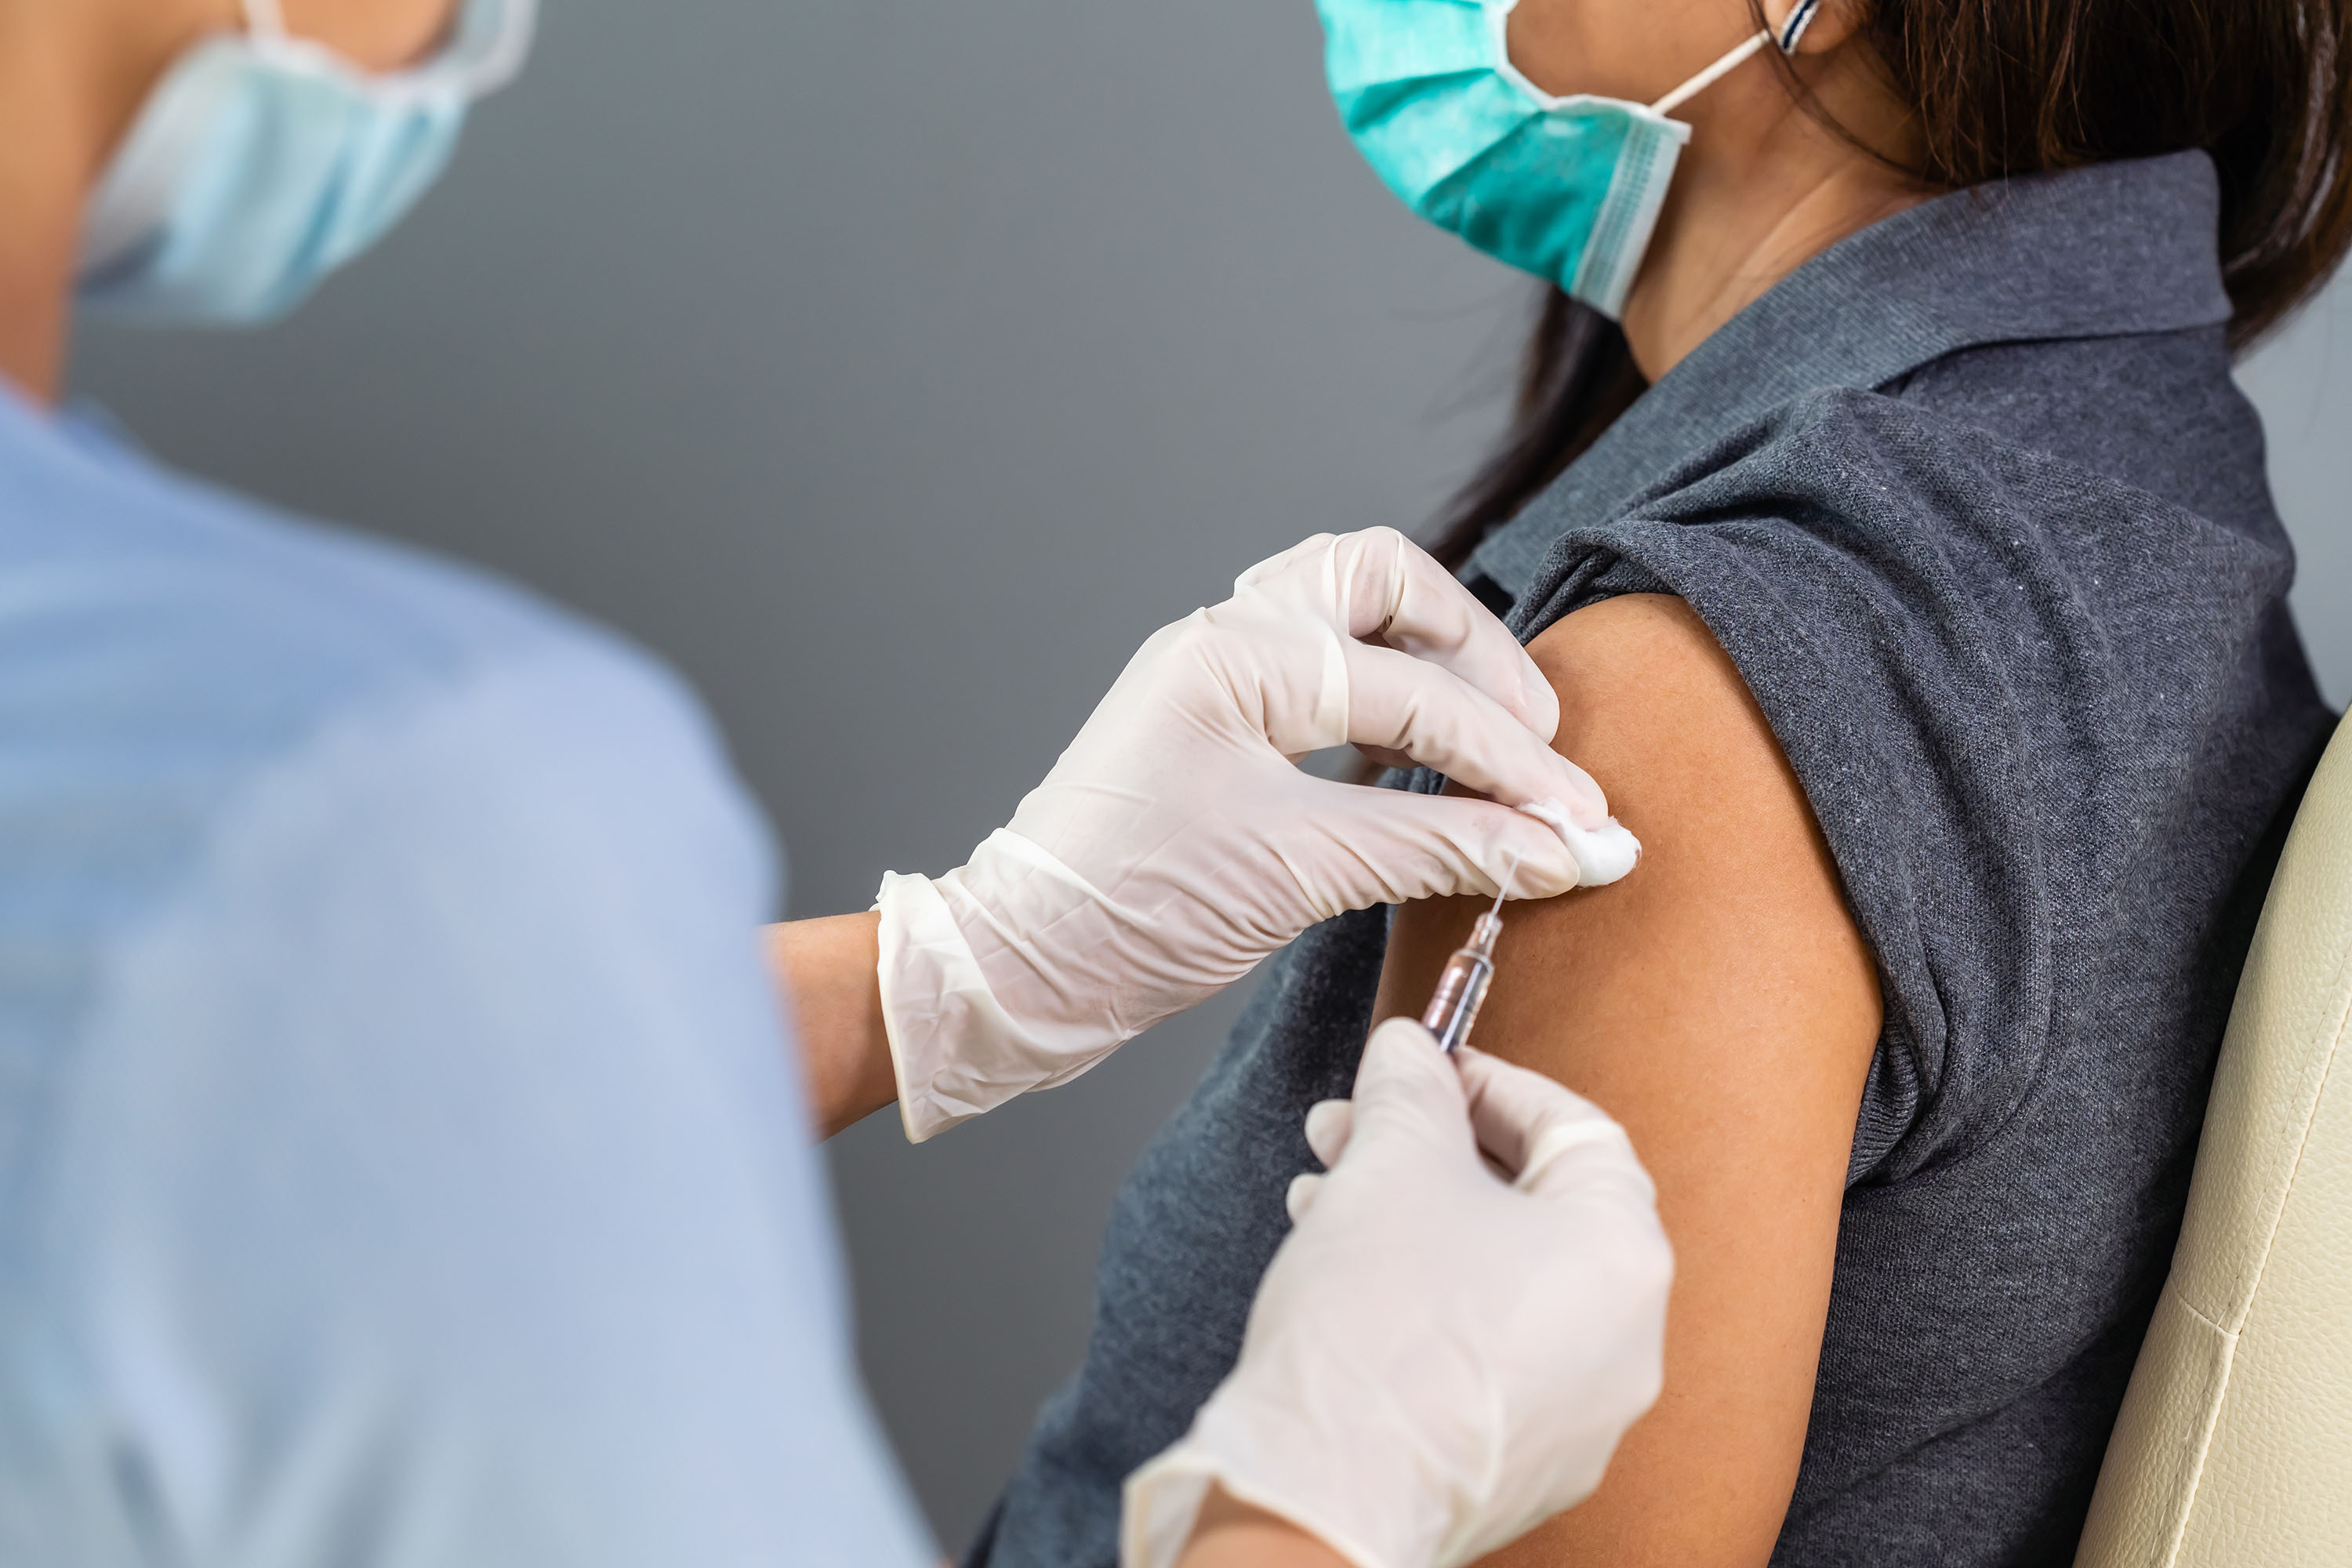 Leave tax credits are available for employees who help others get vaccinated